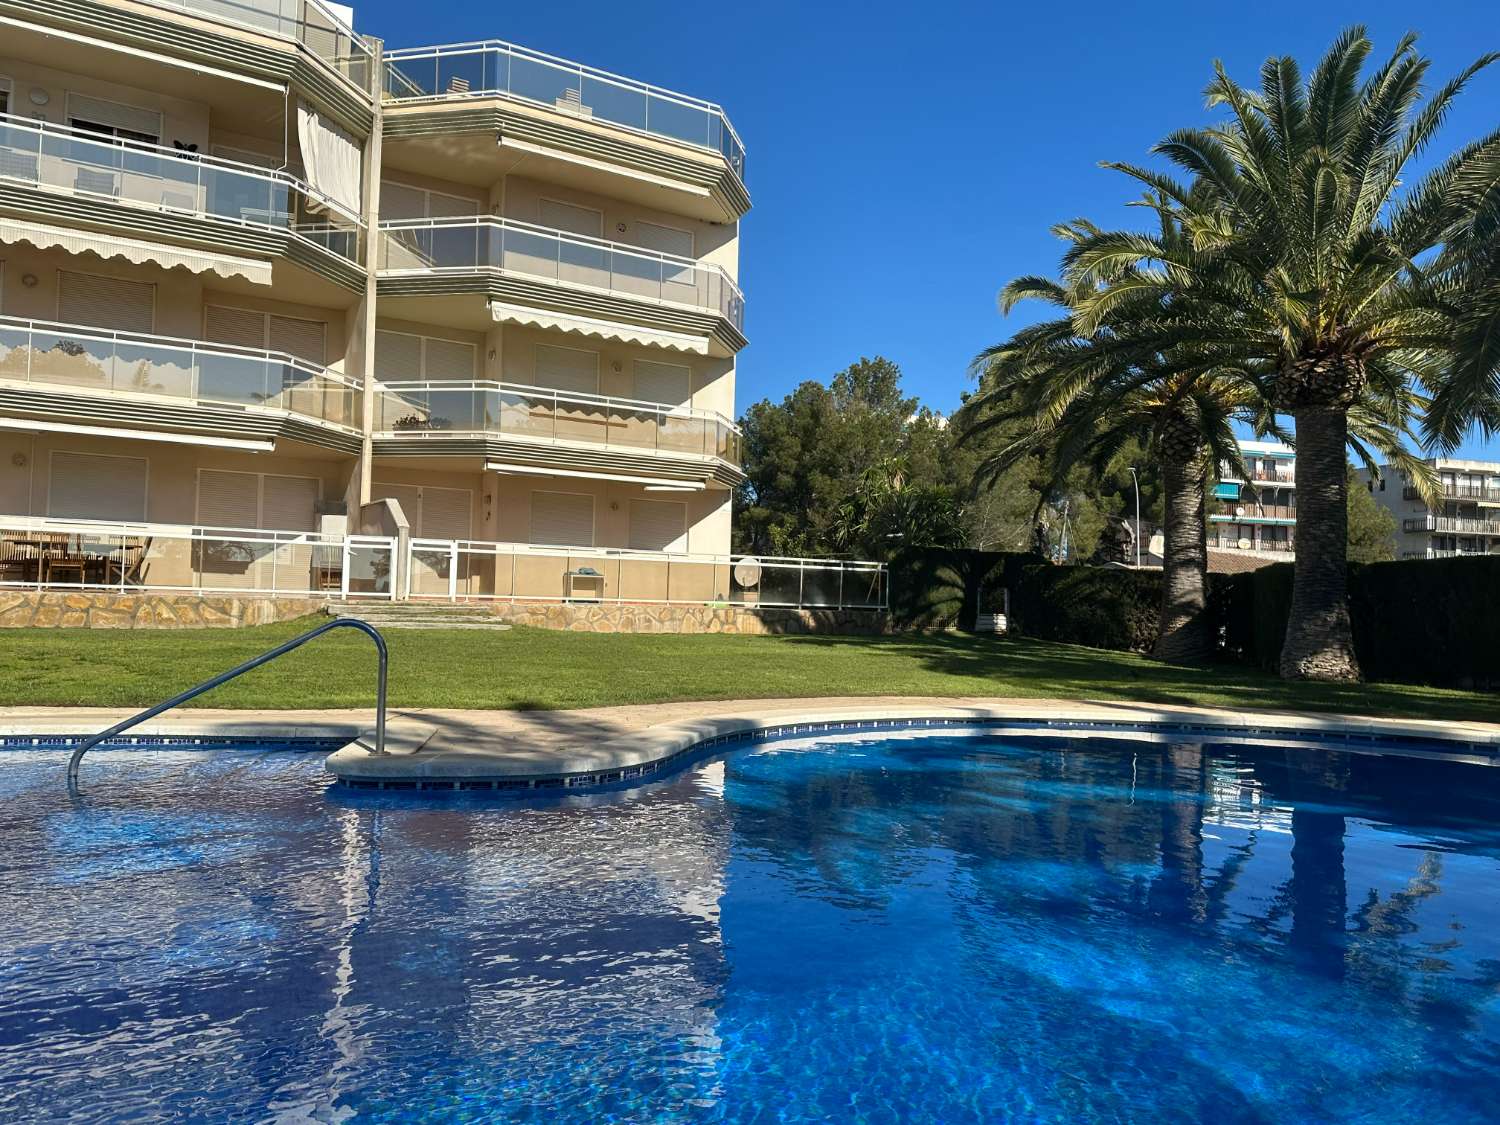 BEAUTIFUL APARTMENT WITH COMMUNAL POOL ON THE SEAFRONT!